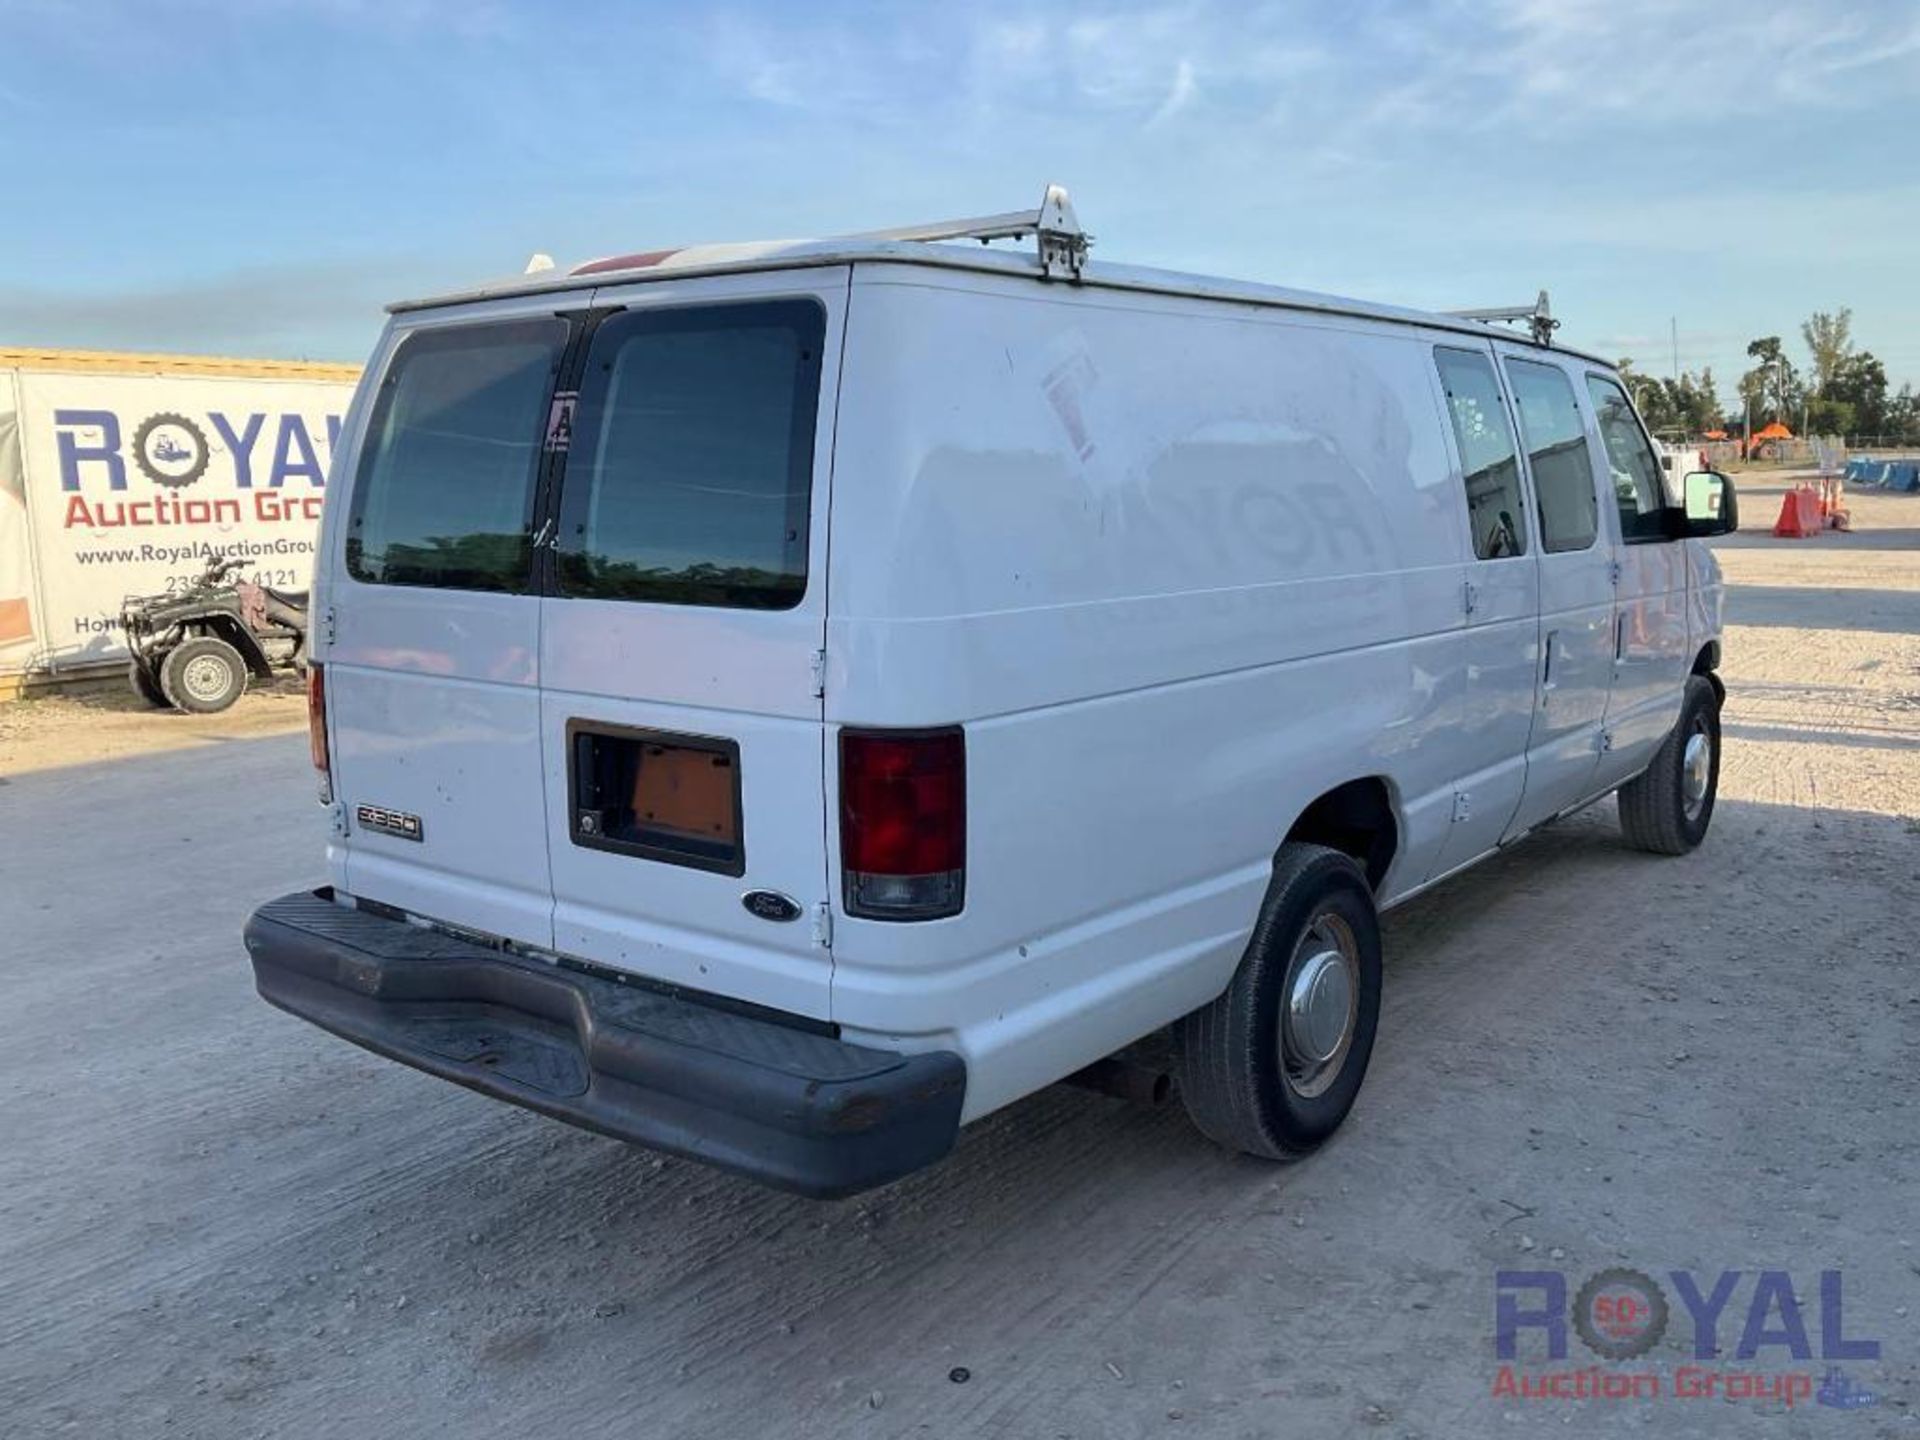 2006 Ford E350 Cargo Van - Image 3 of 36